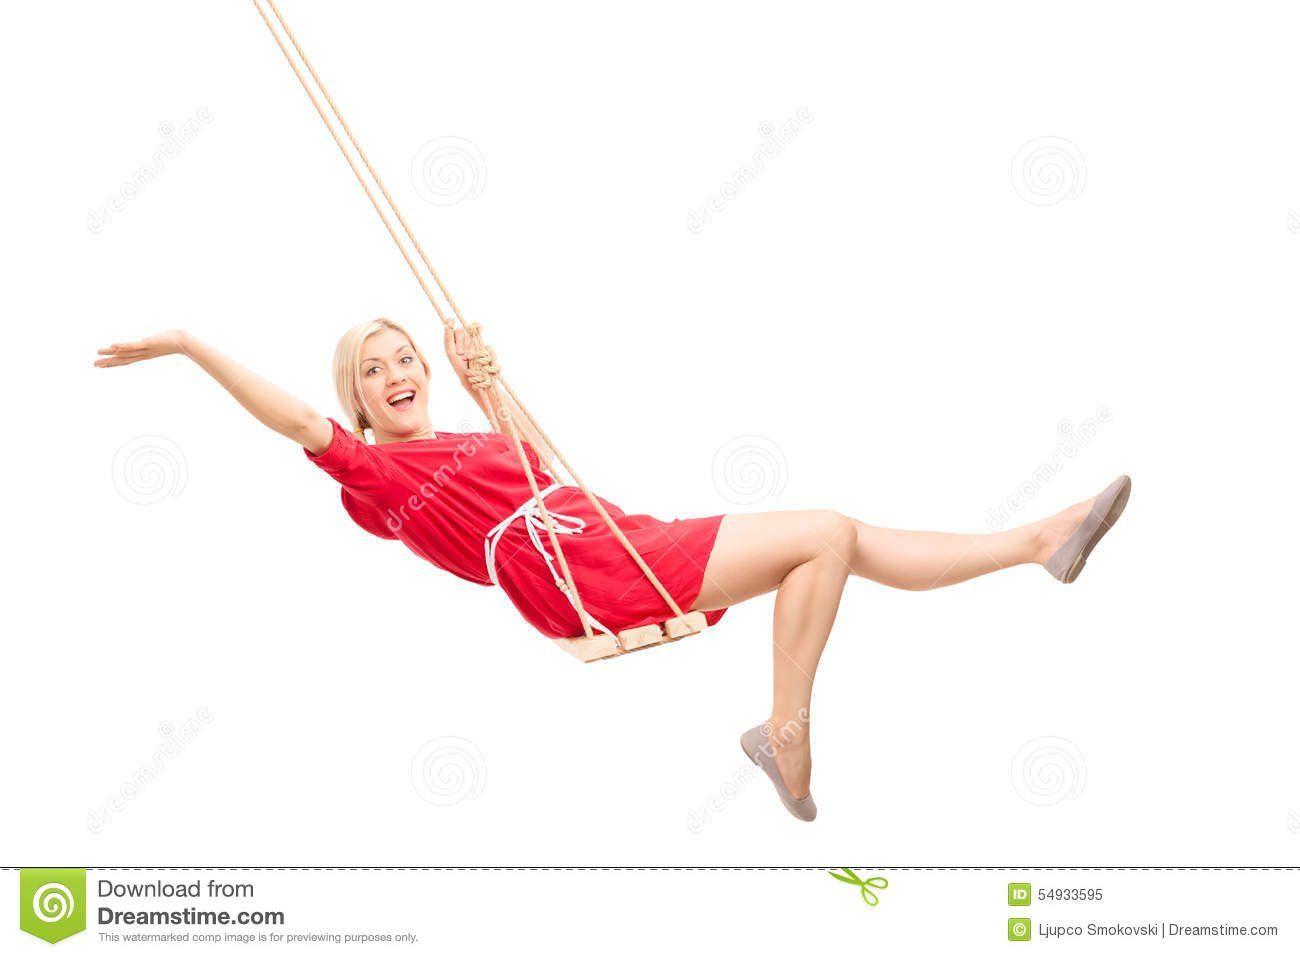 Boomer reccomend I agreed to swinging